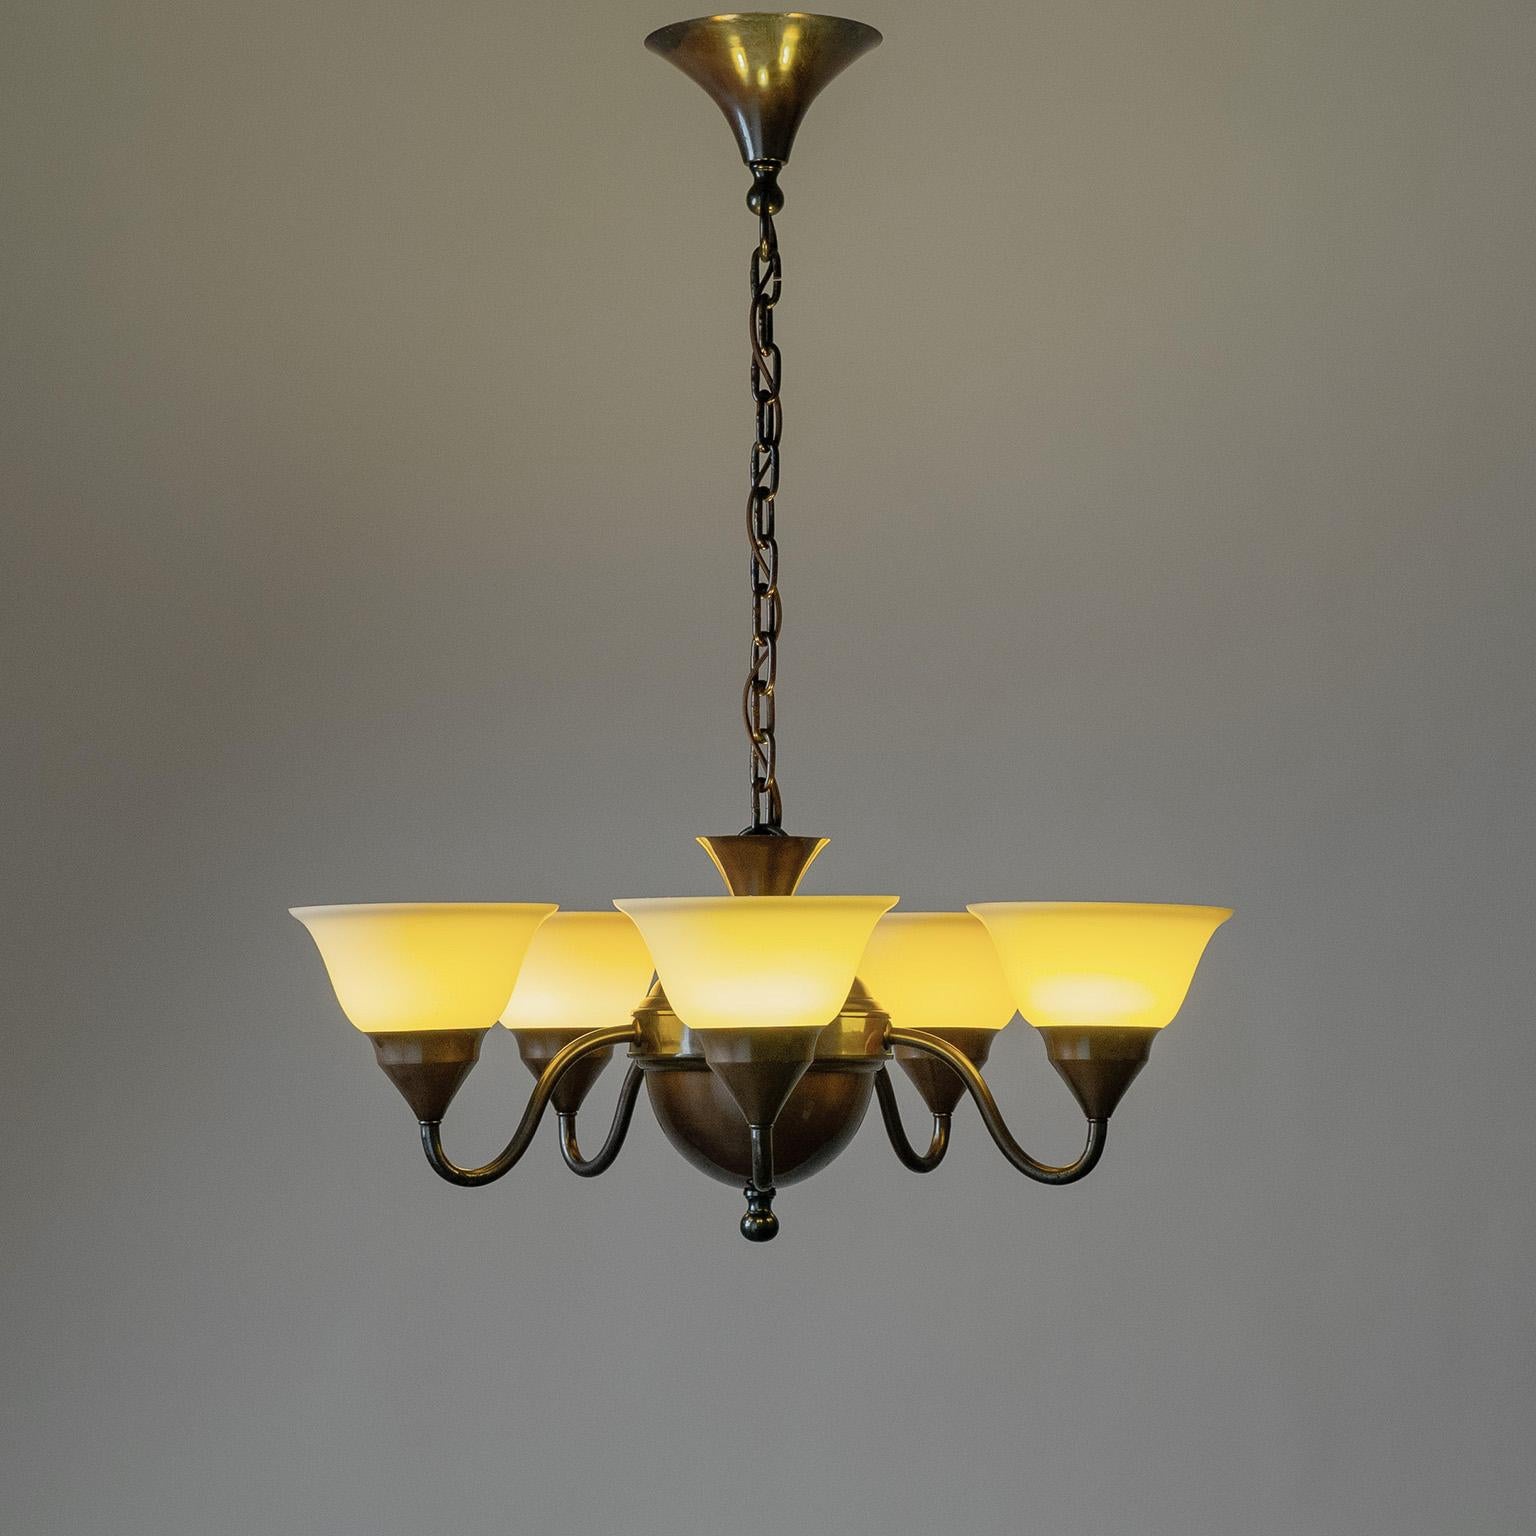 Swedish Patinated Brass Chandelier, 1920s, Enameled Glass For Sale 3